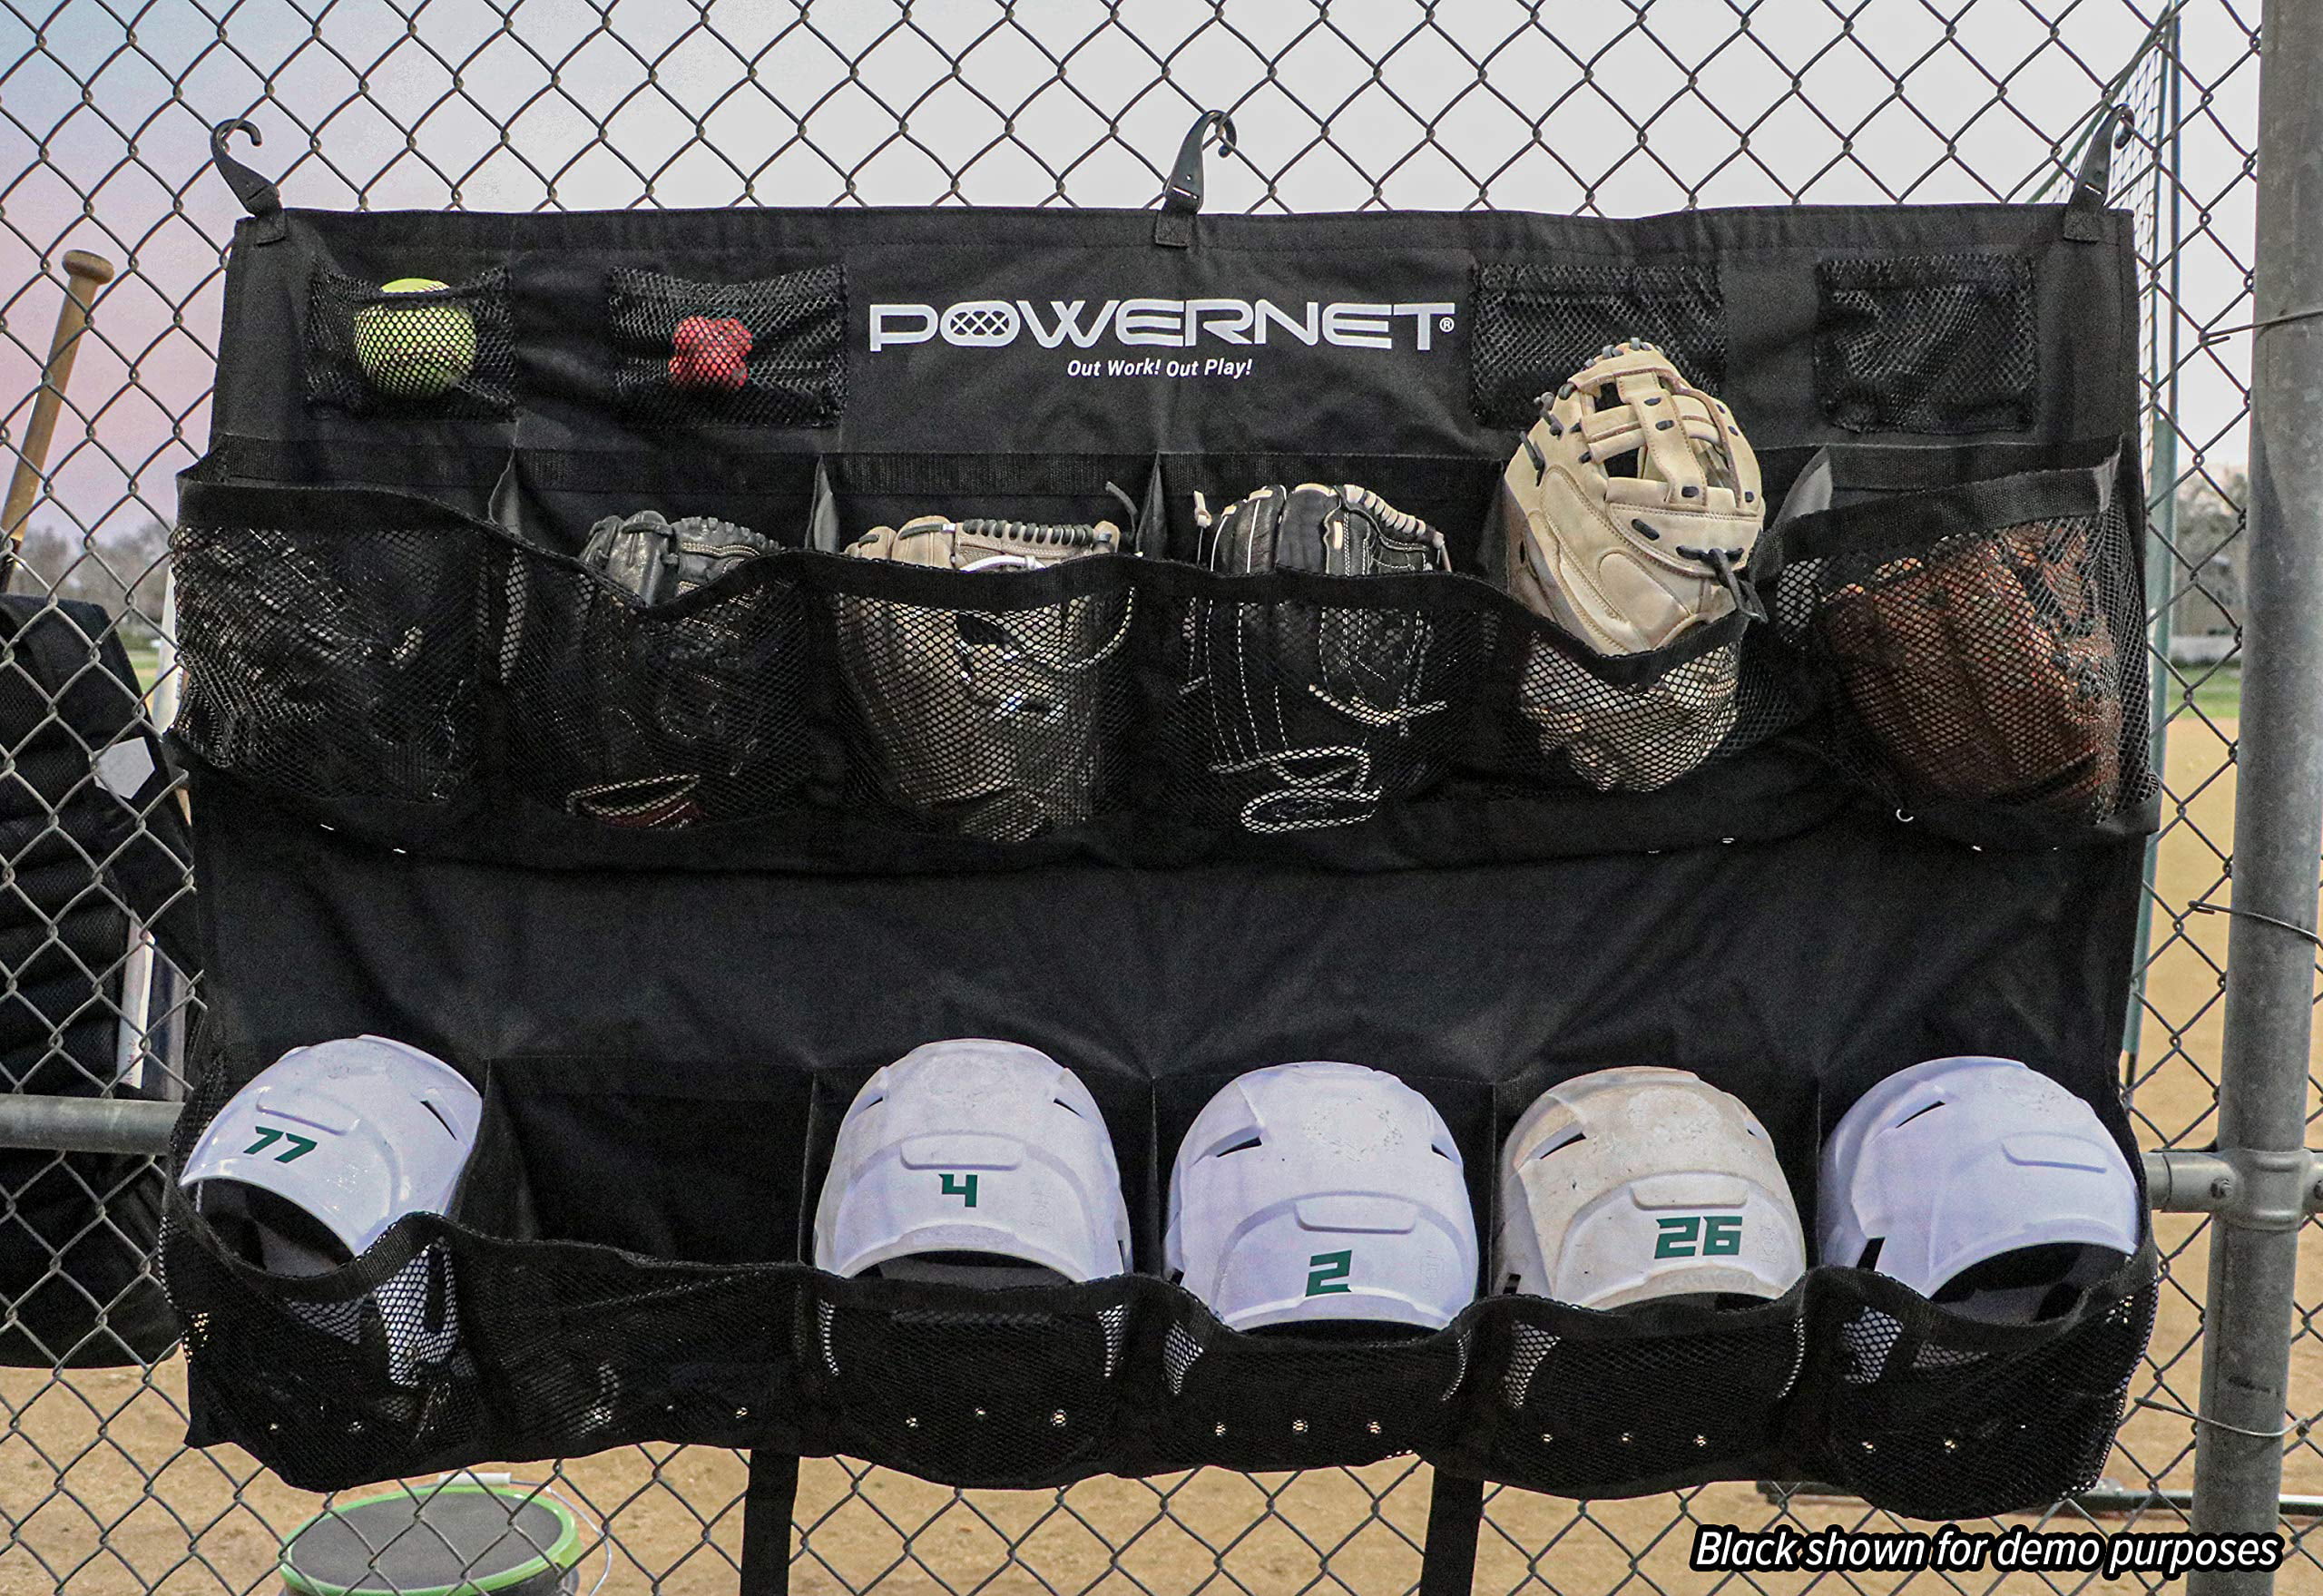 Keeps Players Ready and Dugout Organized Hangs on Fence and Holds Up to 12 Bats PowerNet Hanging Bat Bag Caddy for Baseball and Softball Teams 